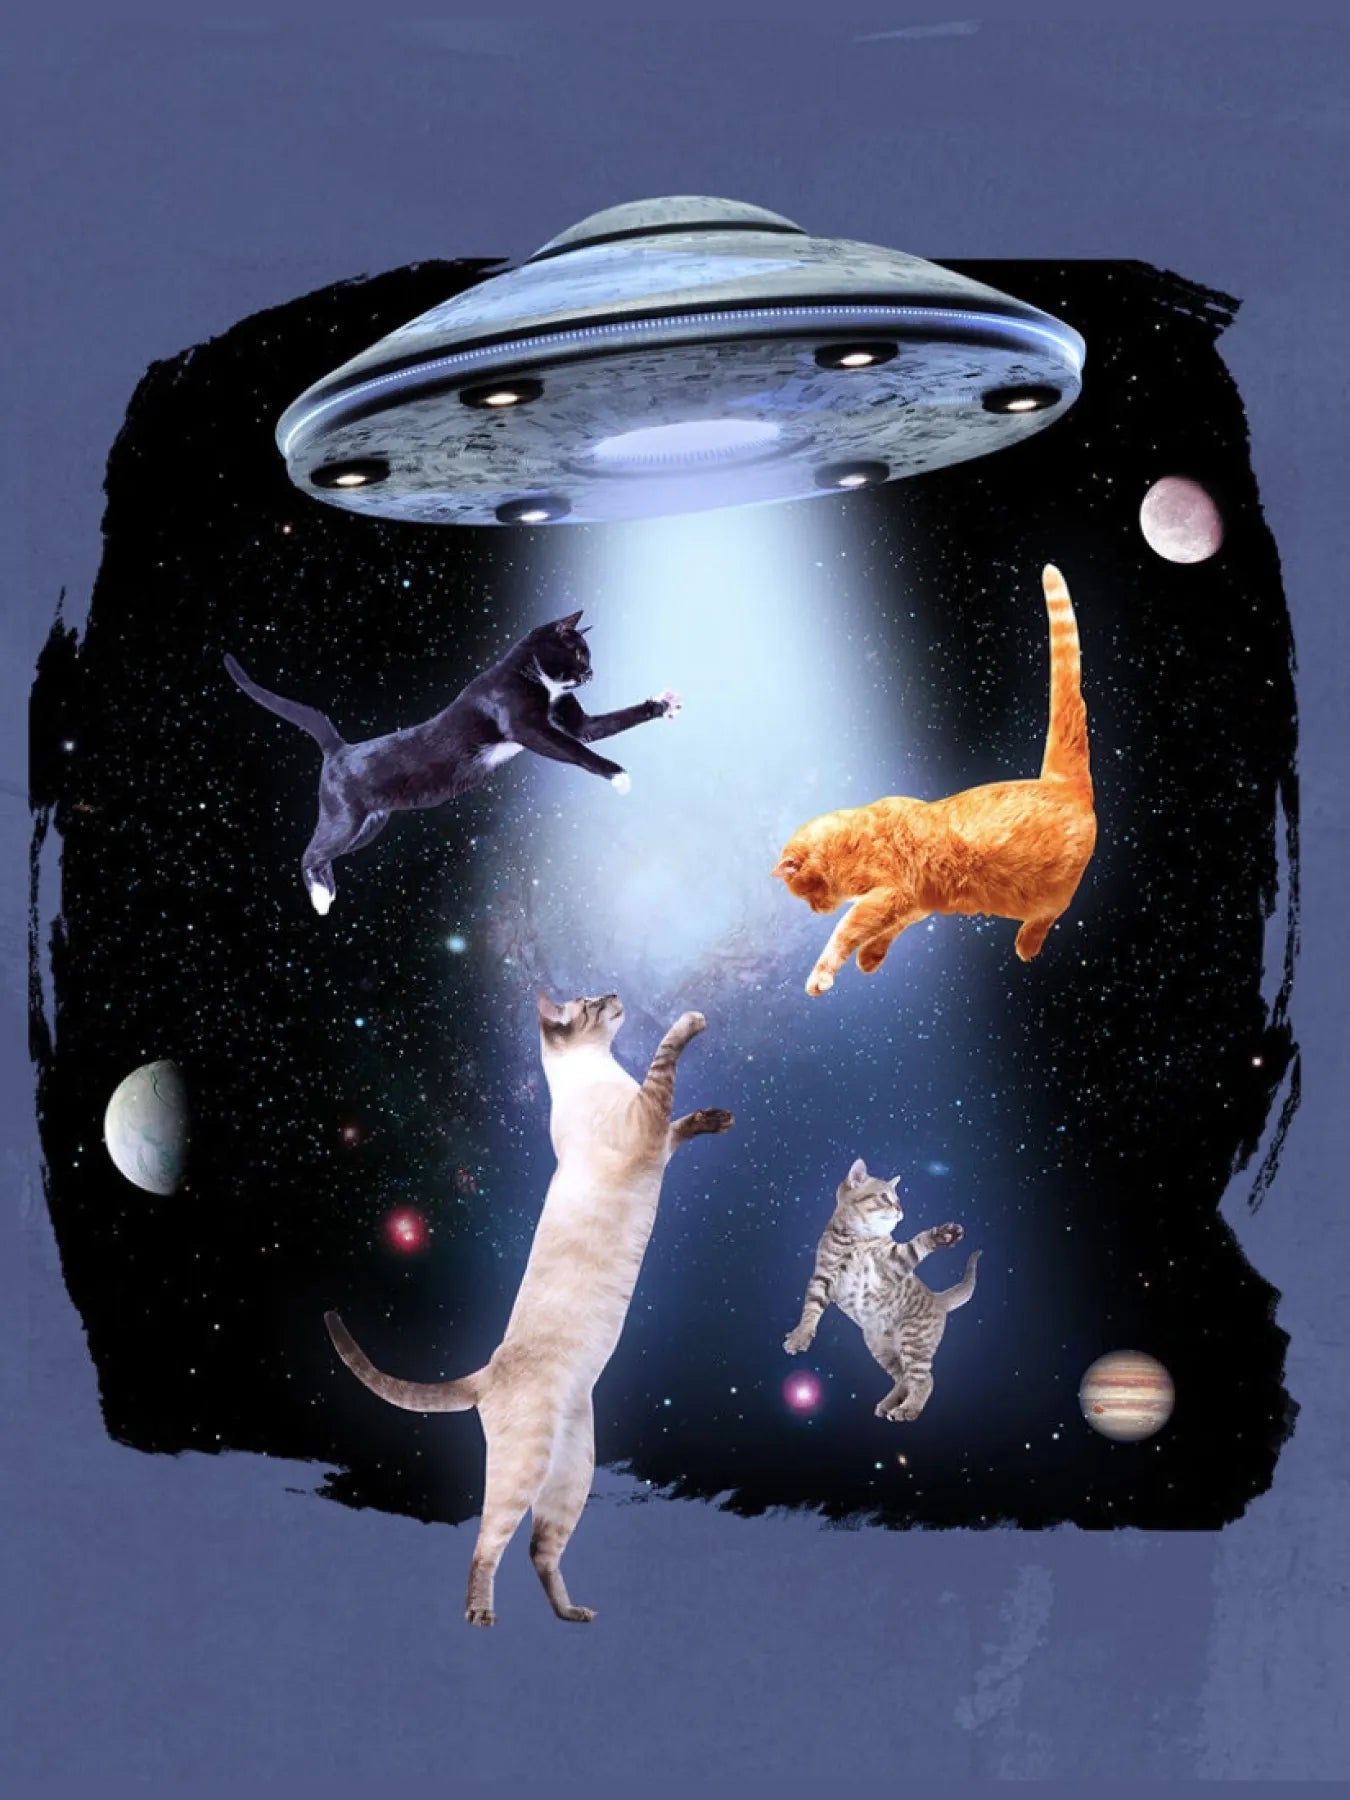 Space, cats & a flying saucer!